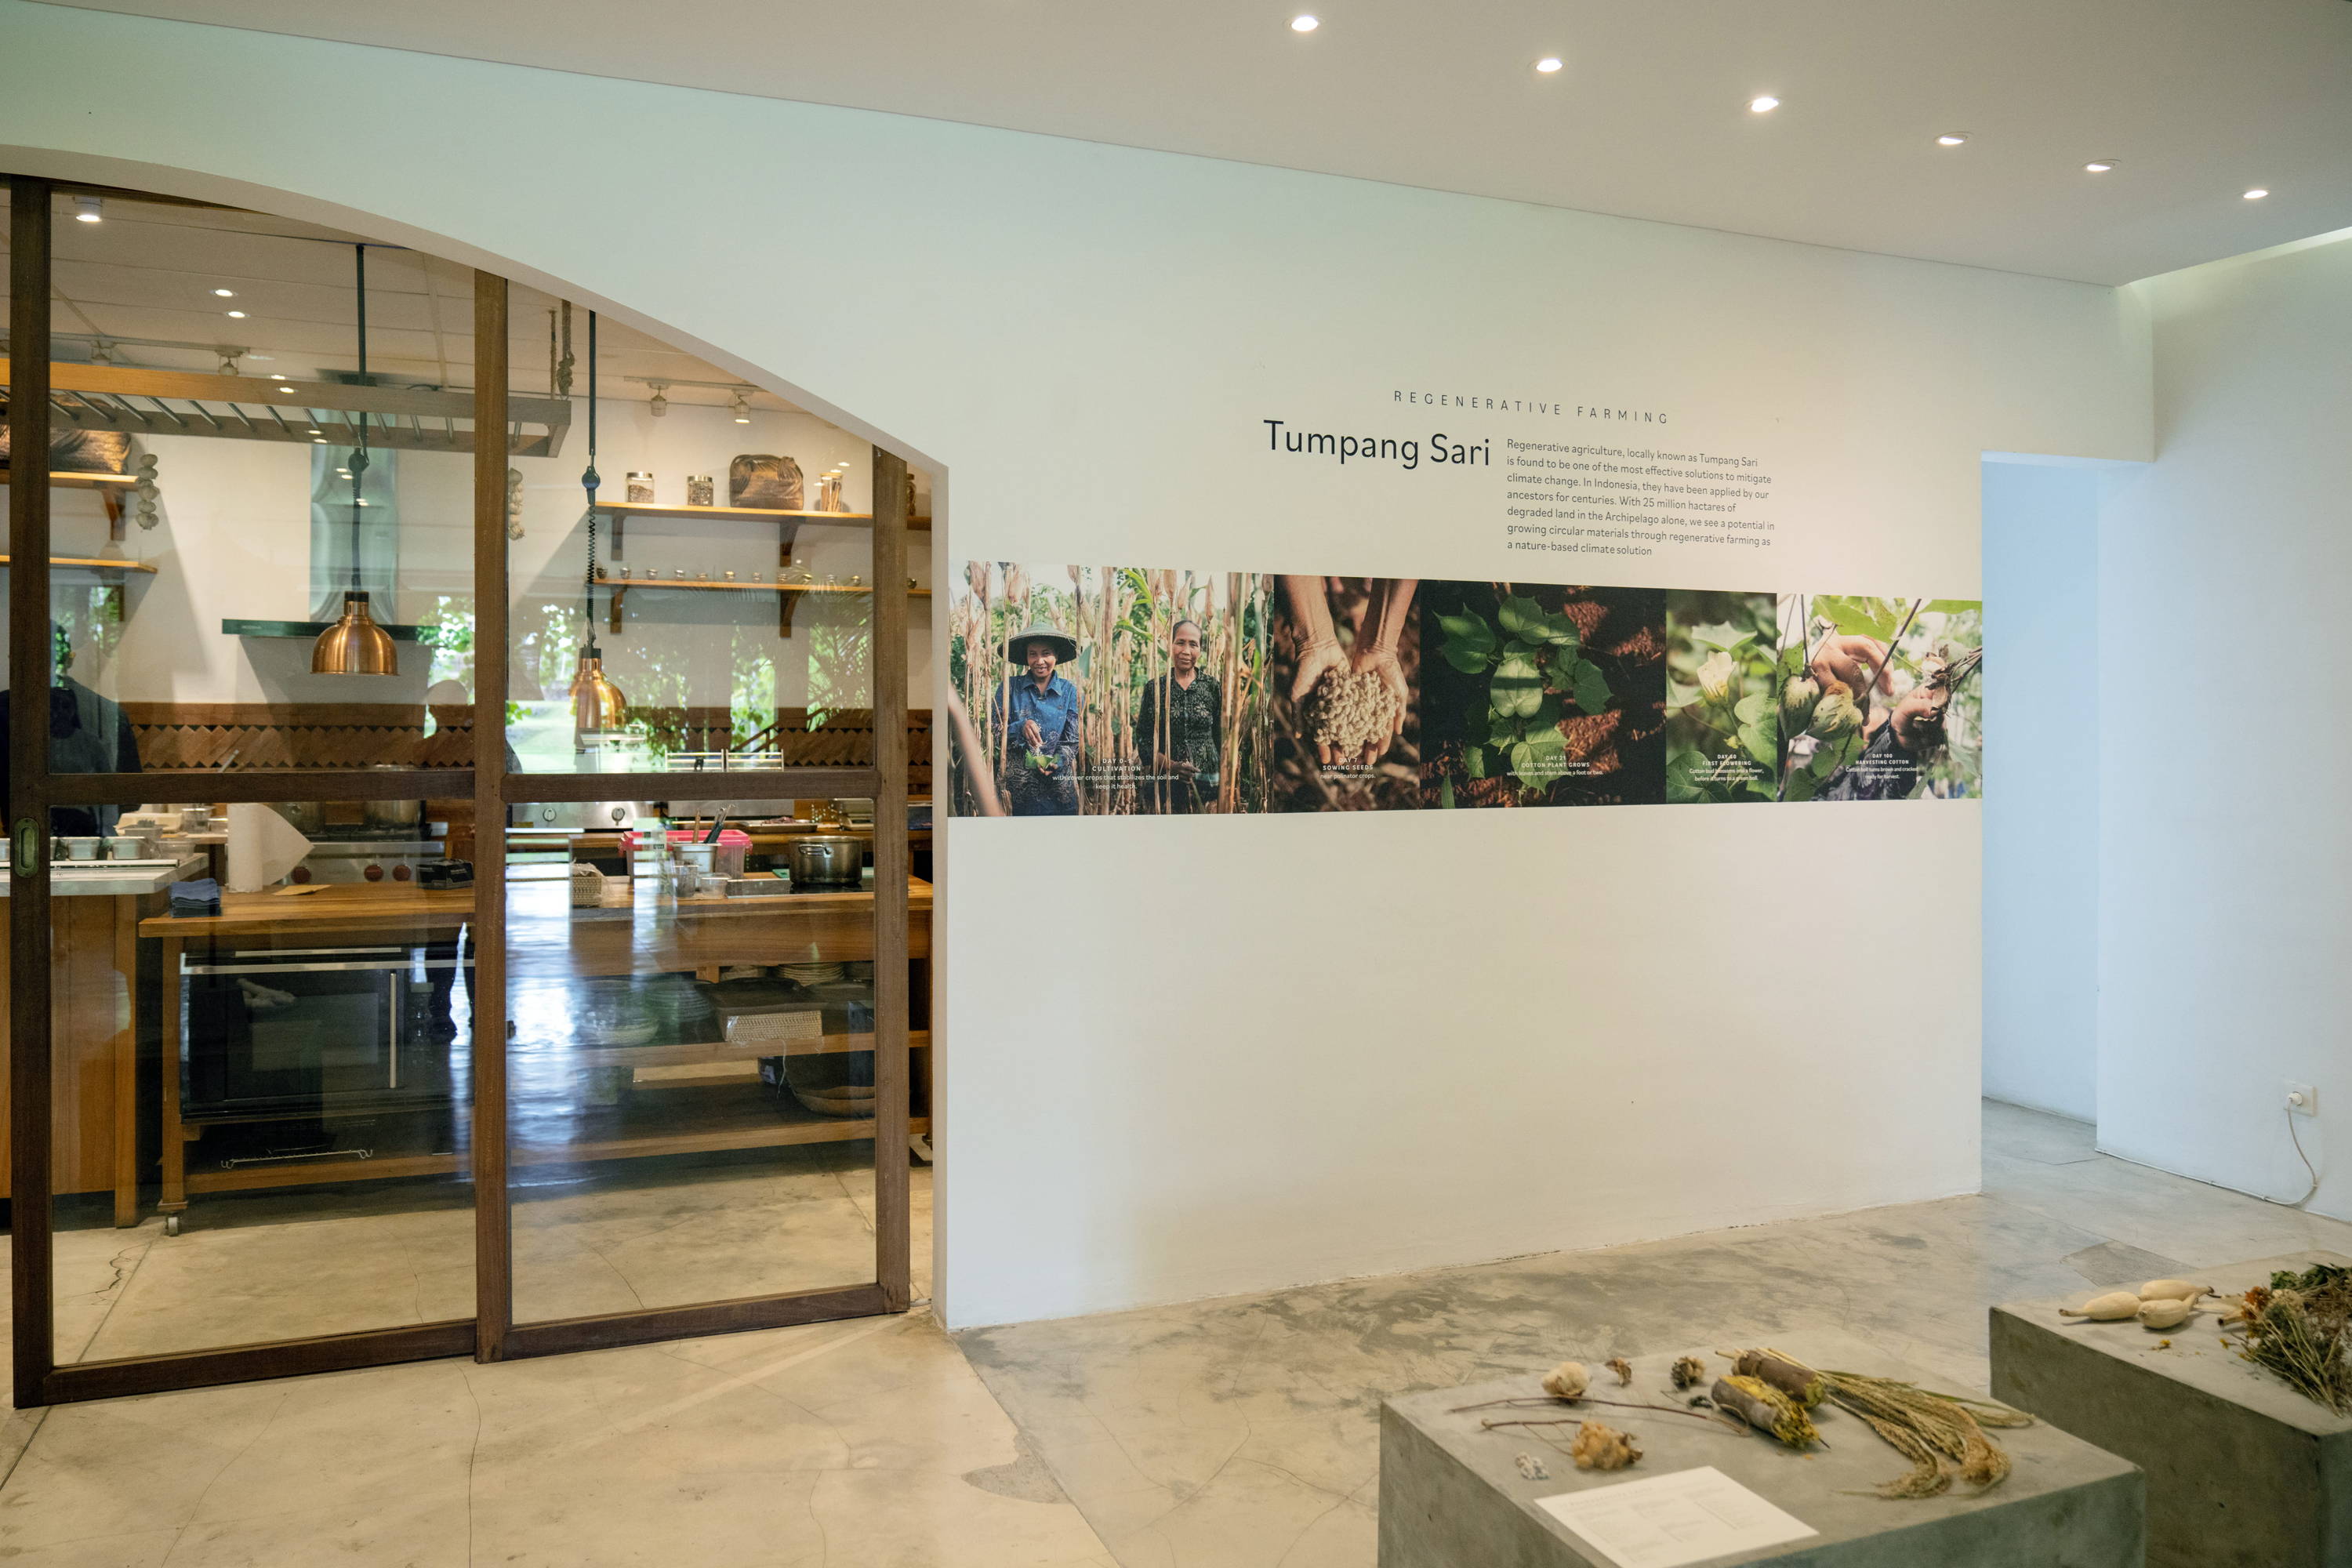 KAPAS Installation by SukkhaCitta in John Hardy Boutique & Gallery at Seminyak. Photographs of Indonesian indigenous cotton farmers are plastered on the wall. Text reads: Regenerative Farming. Tumpang Sari. Regenerative agriculture, locally known as Tumpang Sari is found to be one of the most effective solutions to mitigate climate change. In Indonesia, they have been applied by our ancestors for centuries. With 25 million hectares of degraded land in the Archipelago alone, we see a potential in growing circular materials through regenerative farming as a nature-based climate solution.